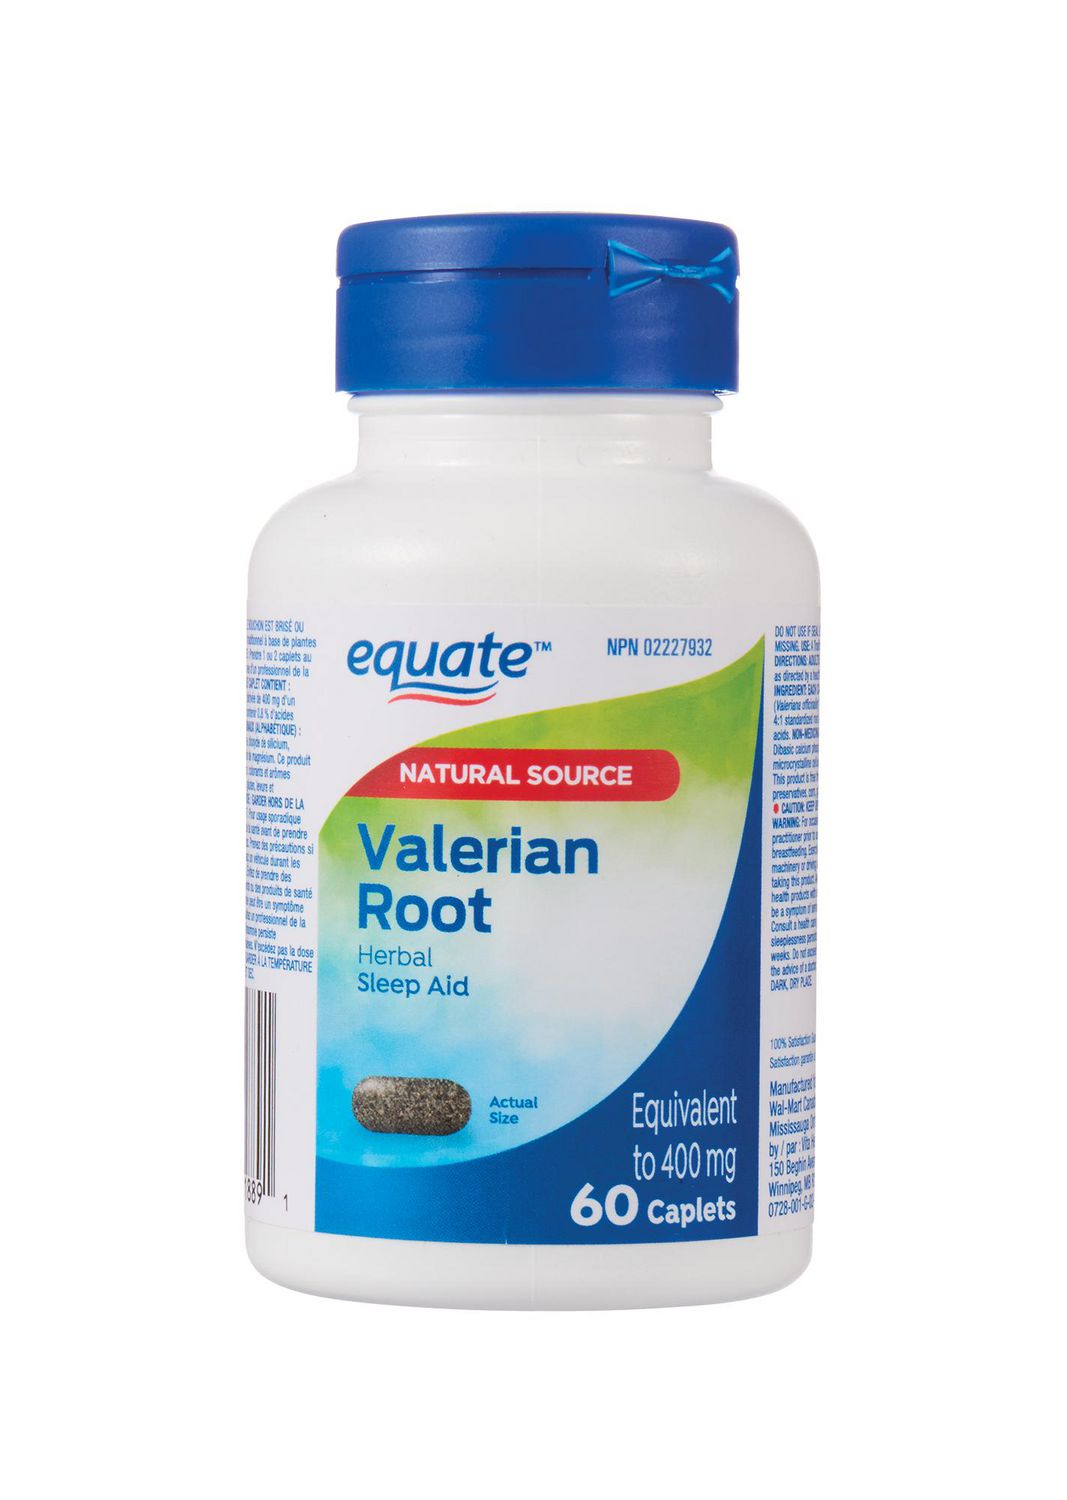 is 500 mg of valerian root safe for dogs